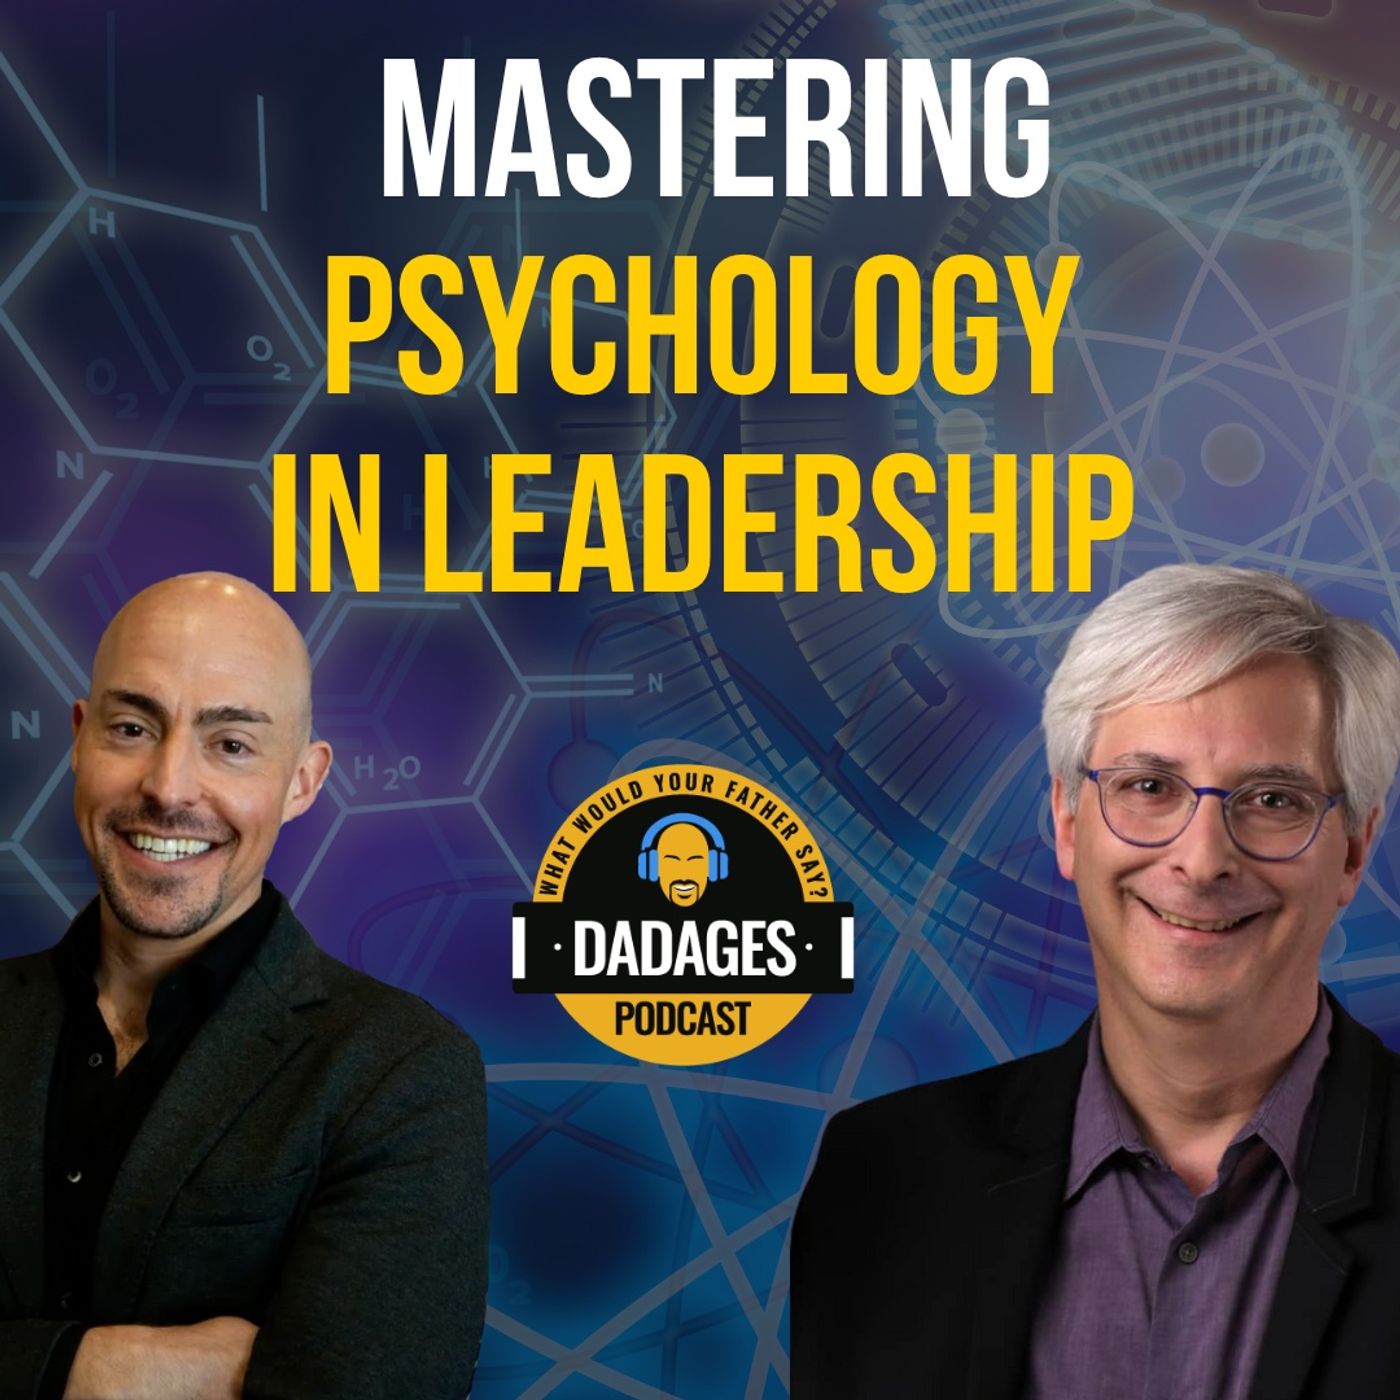 Mastering Psychology in Leadership: Dr. Art Markman's Insights on Psychology & Career Growth